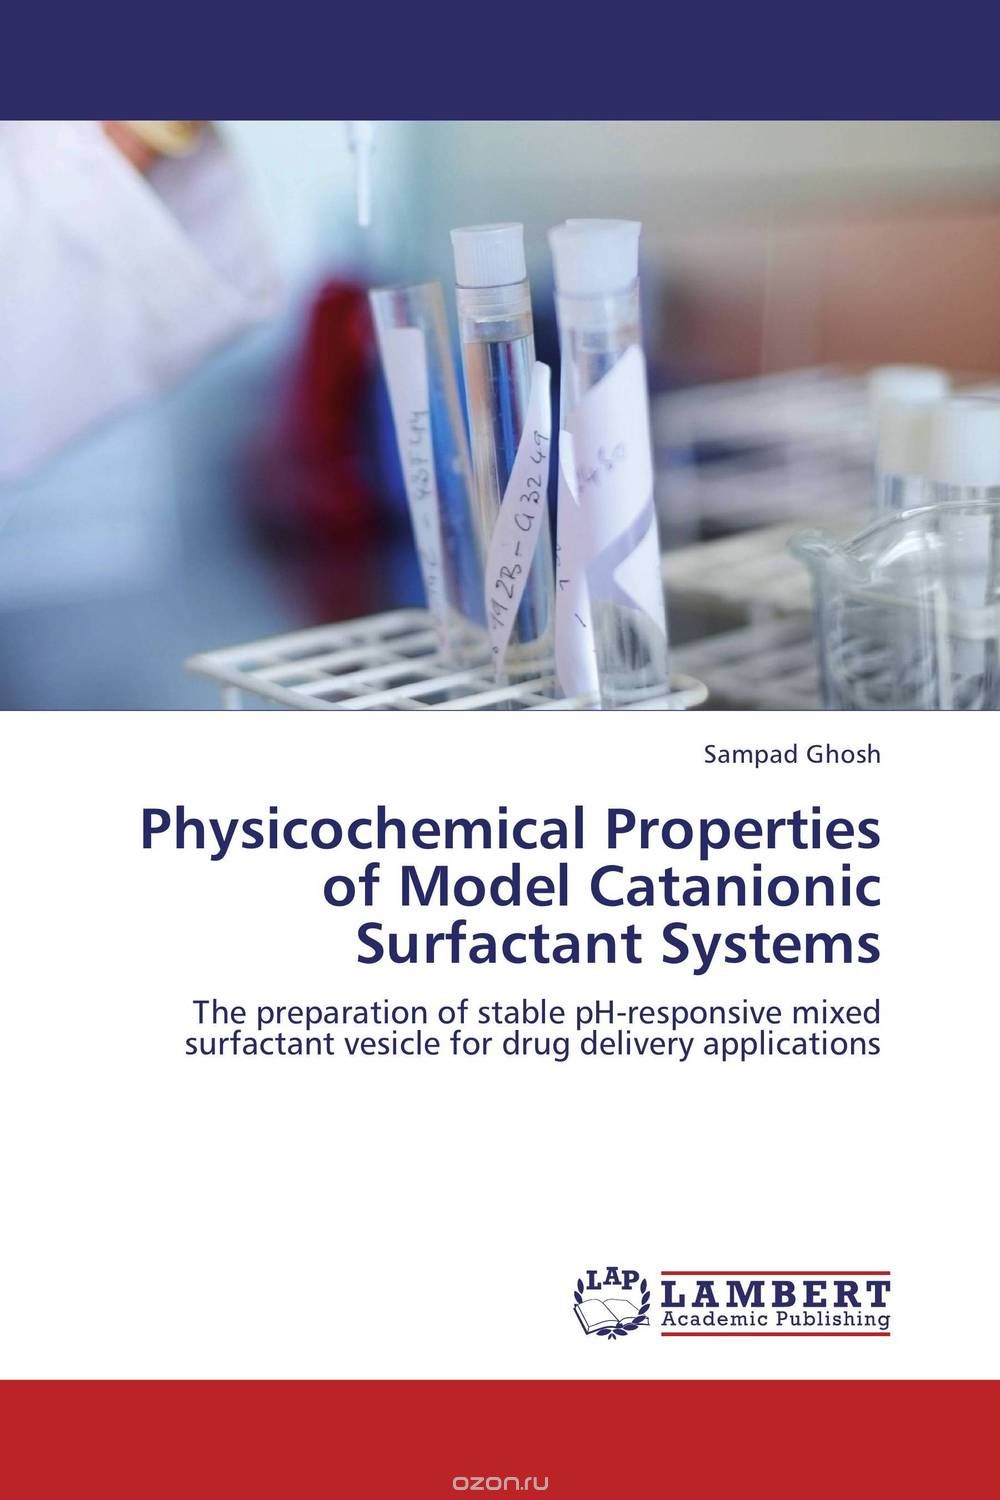 Physicochemical Properties of Model Catanionic Surfactant Systems